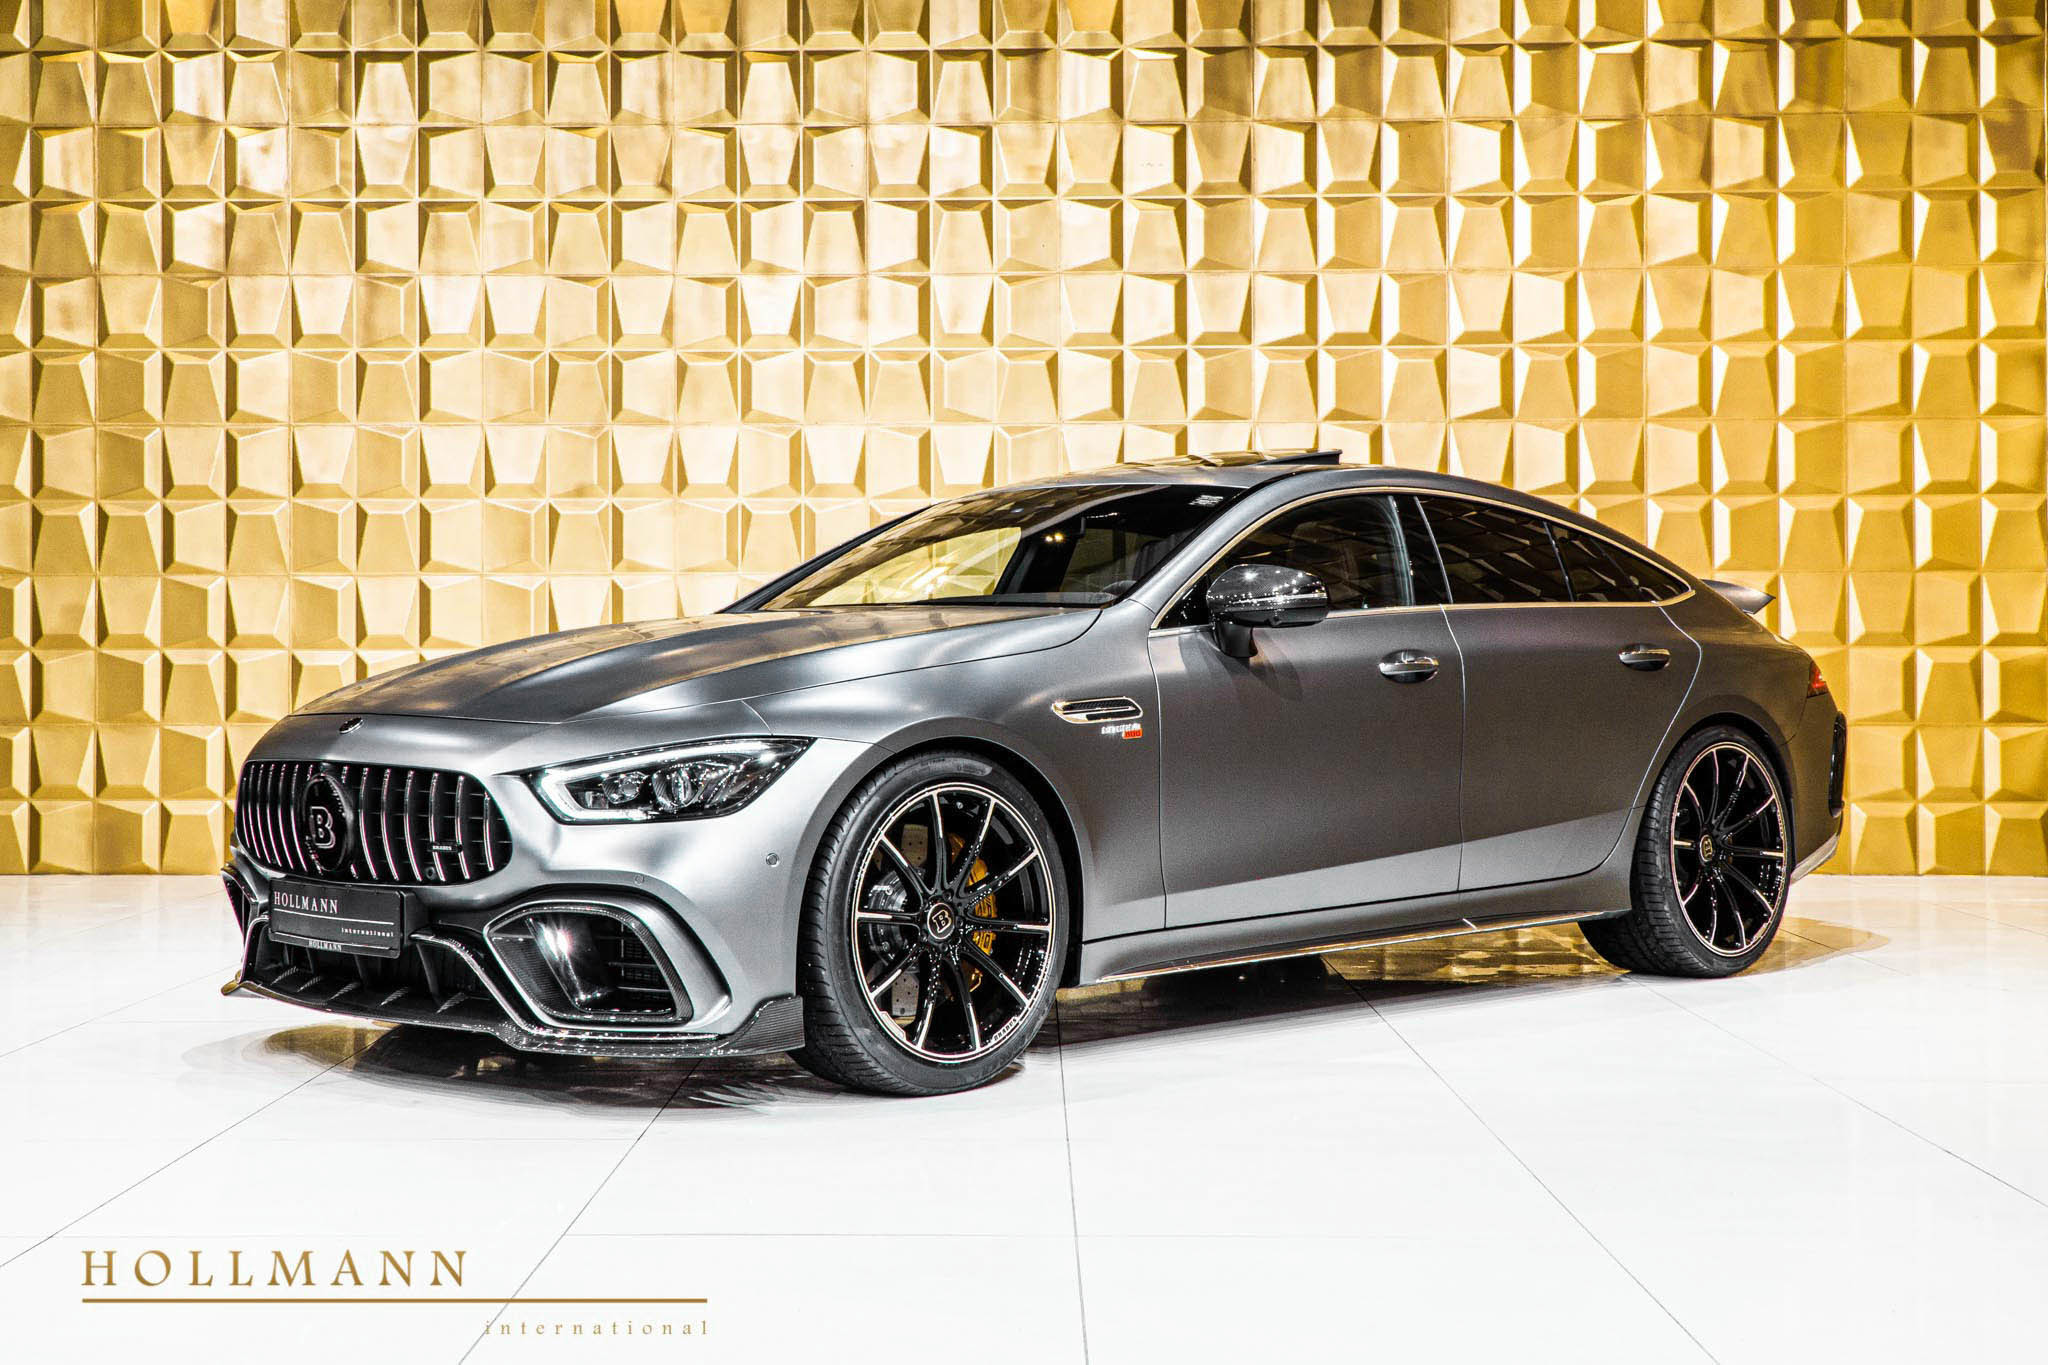 Mercedes Benz Amg Gt 63 S 4m Brabus 800 Luxury Pulse Cars Germany For Sale On Luxurypulse